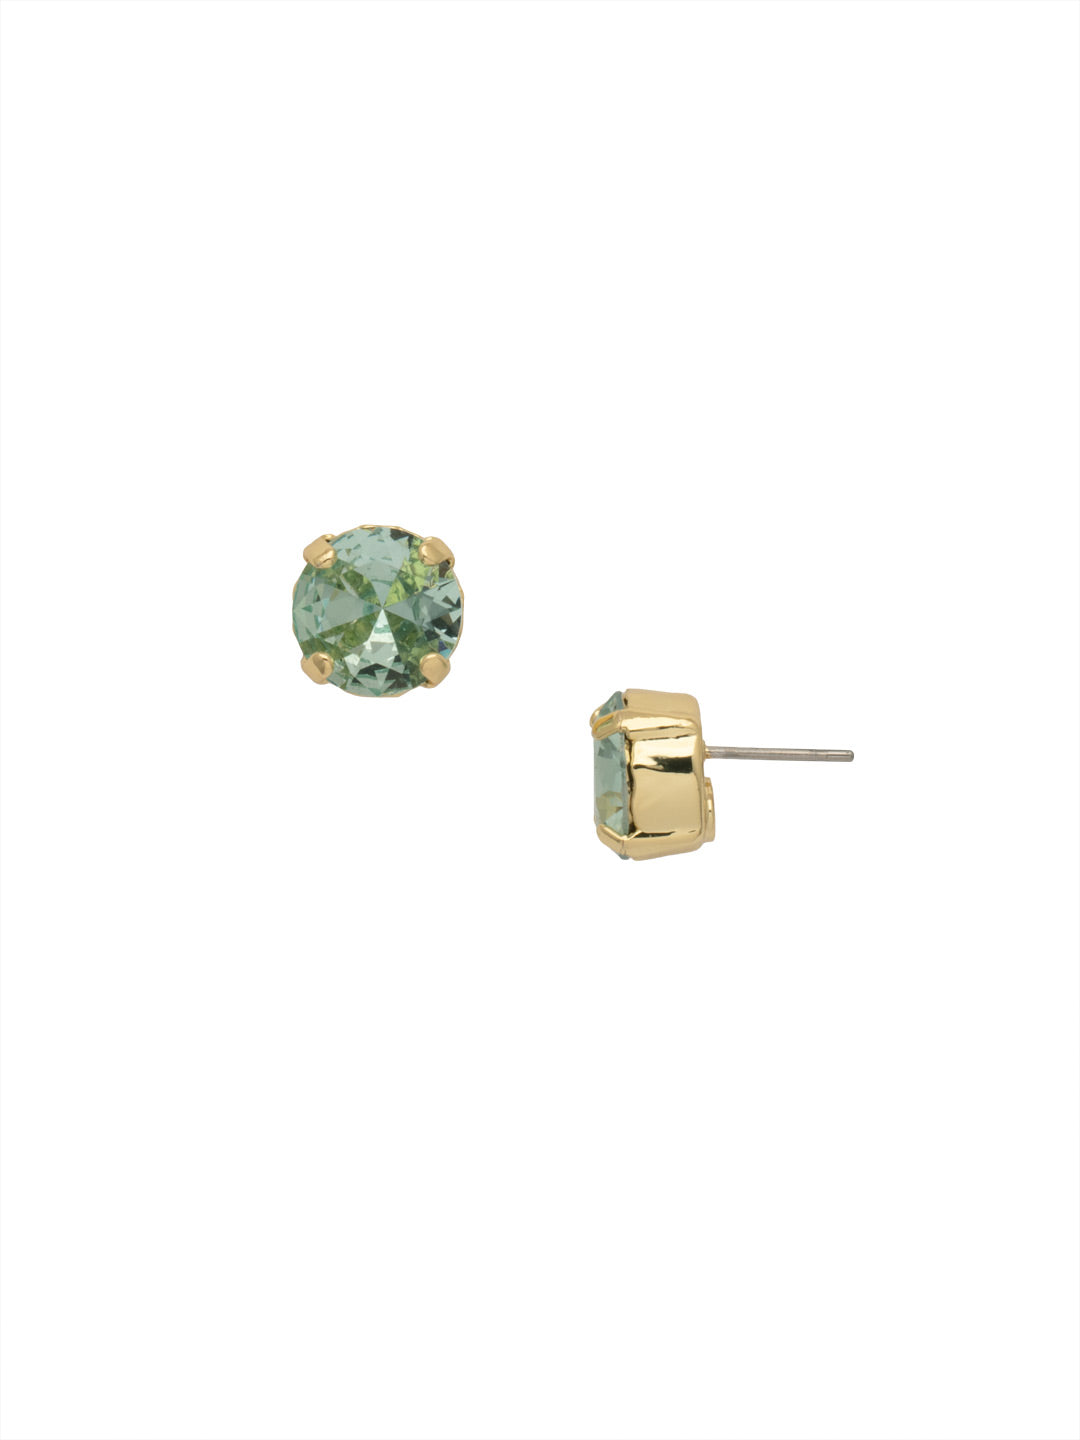 London Stud Earrings - ECM14BGSGR - <p>Everyone needs a great pair of studs. Add some classic sparkle to any occasion with these stud earrings. Need help picking a stud? <a href="https://www.sorrelli.com/blogs/sisterhood/round-stud-earrings-101-a-rundown-of-sizes-styles-and-sparkle">Check out our size guide!</a> From Sorrelli's Sage Green collection in our Bright Gold-tone finish.</p>